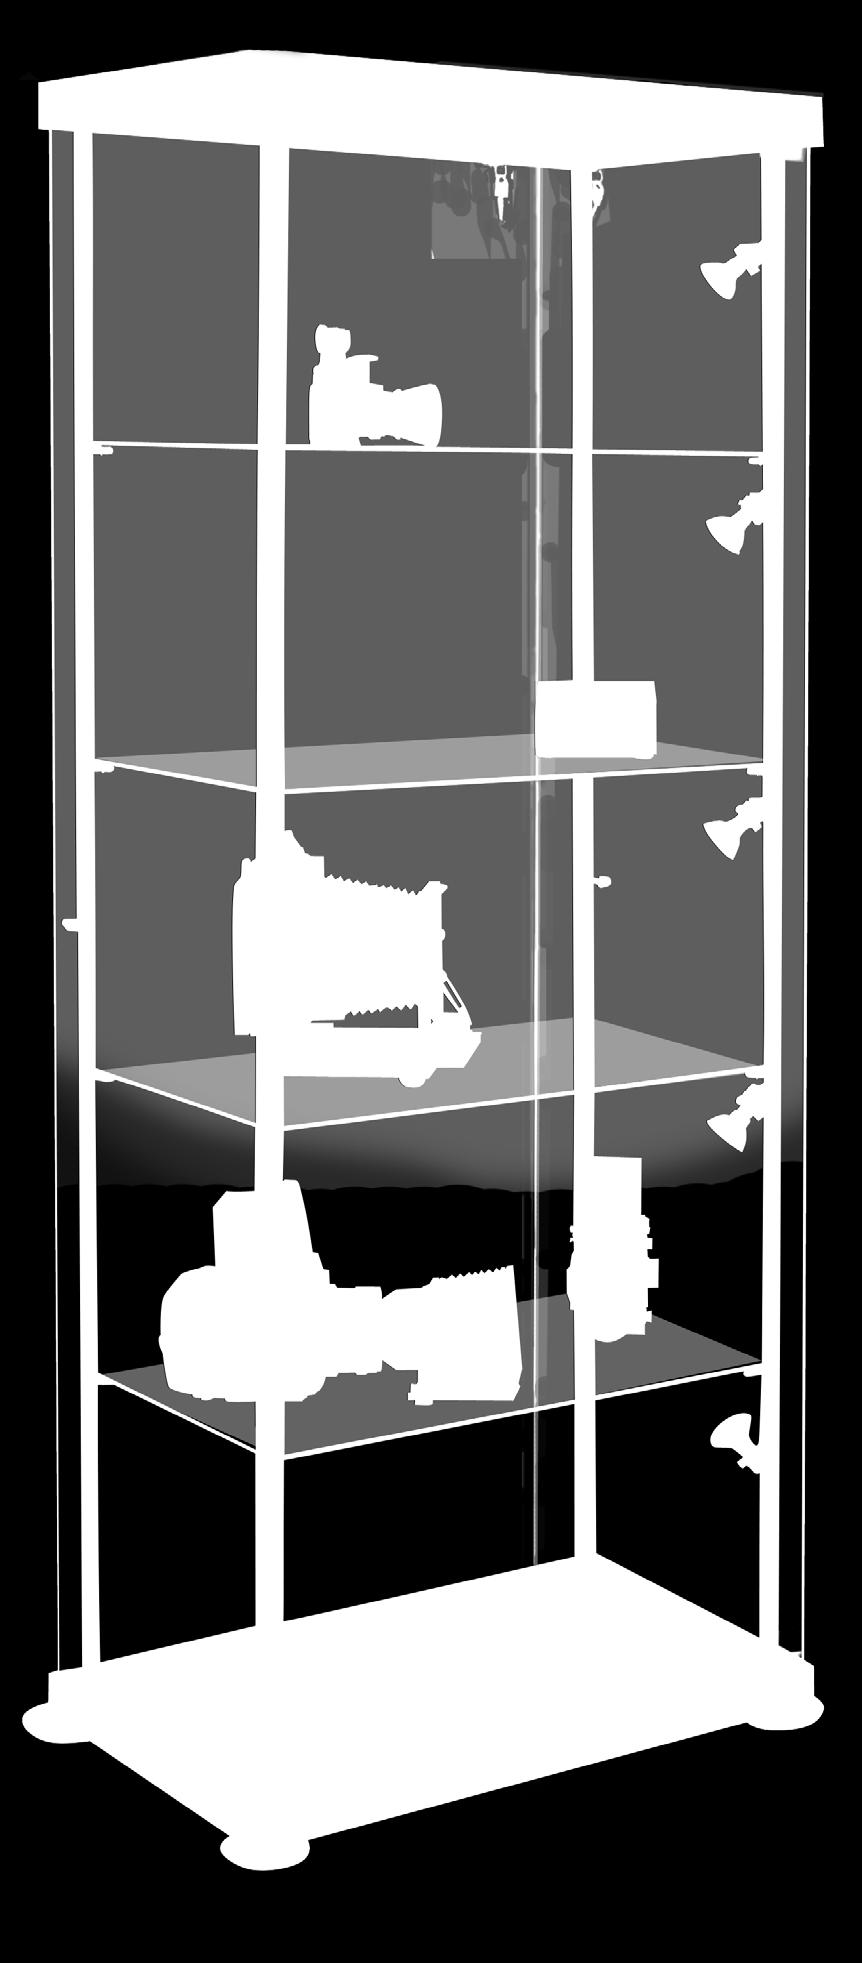 The cabinet stands on 4 adjustable feet, enabling the cabinet